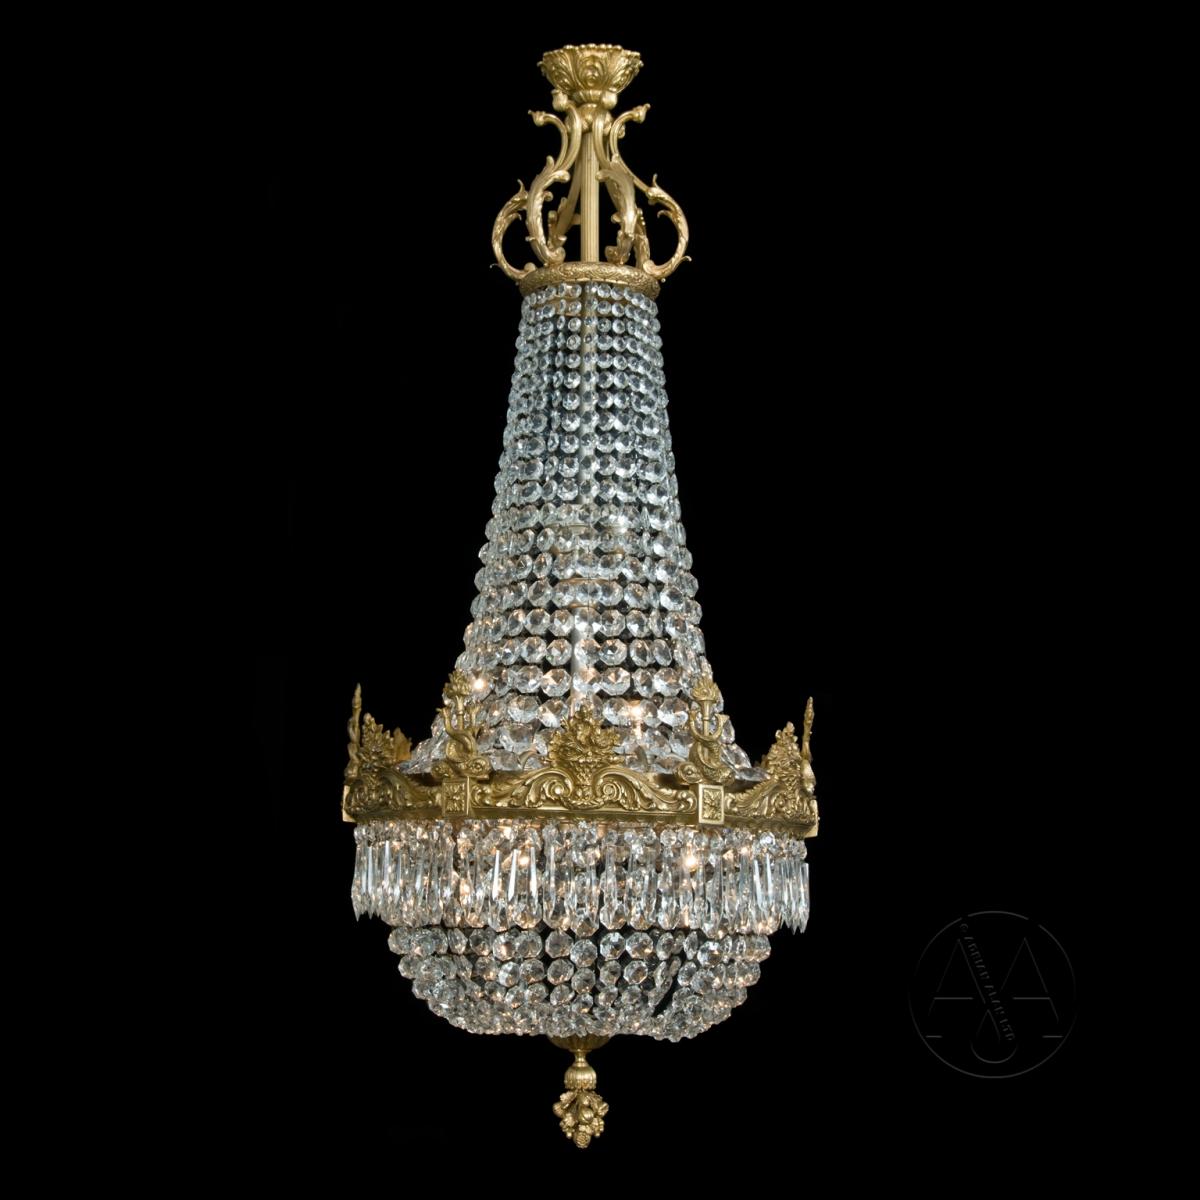 A Fine Gilt-Bronze Cut-Glass Tent and Bag Chandelier With Finely Cast Entwined Dolphins